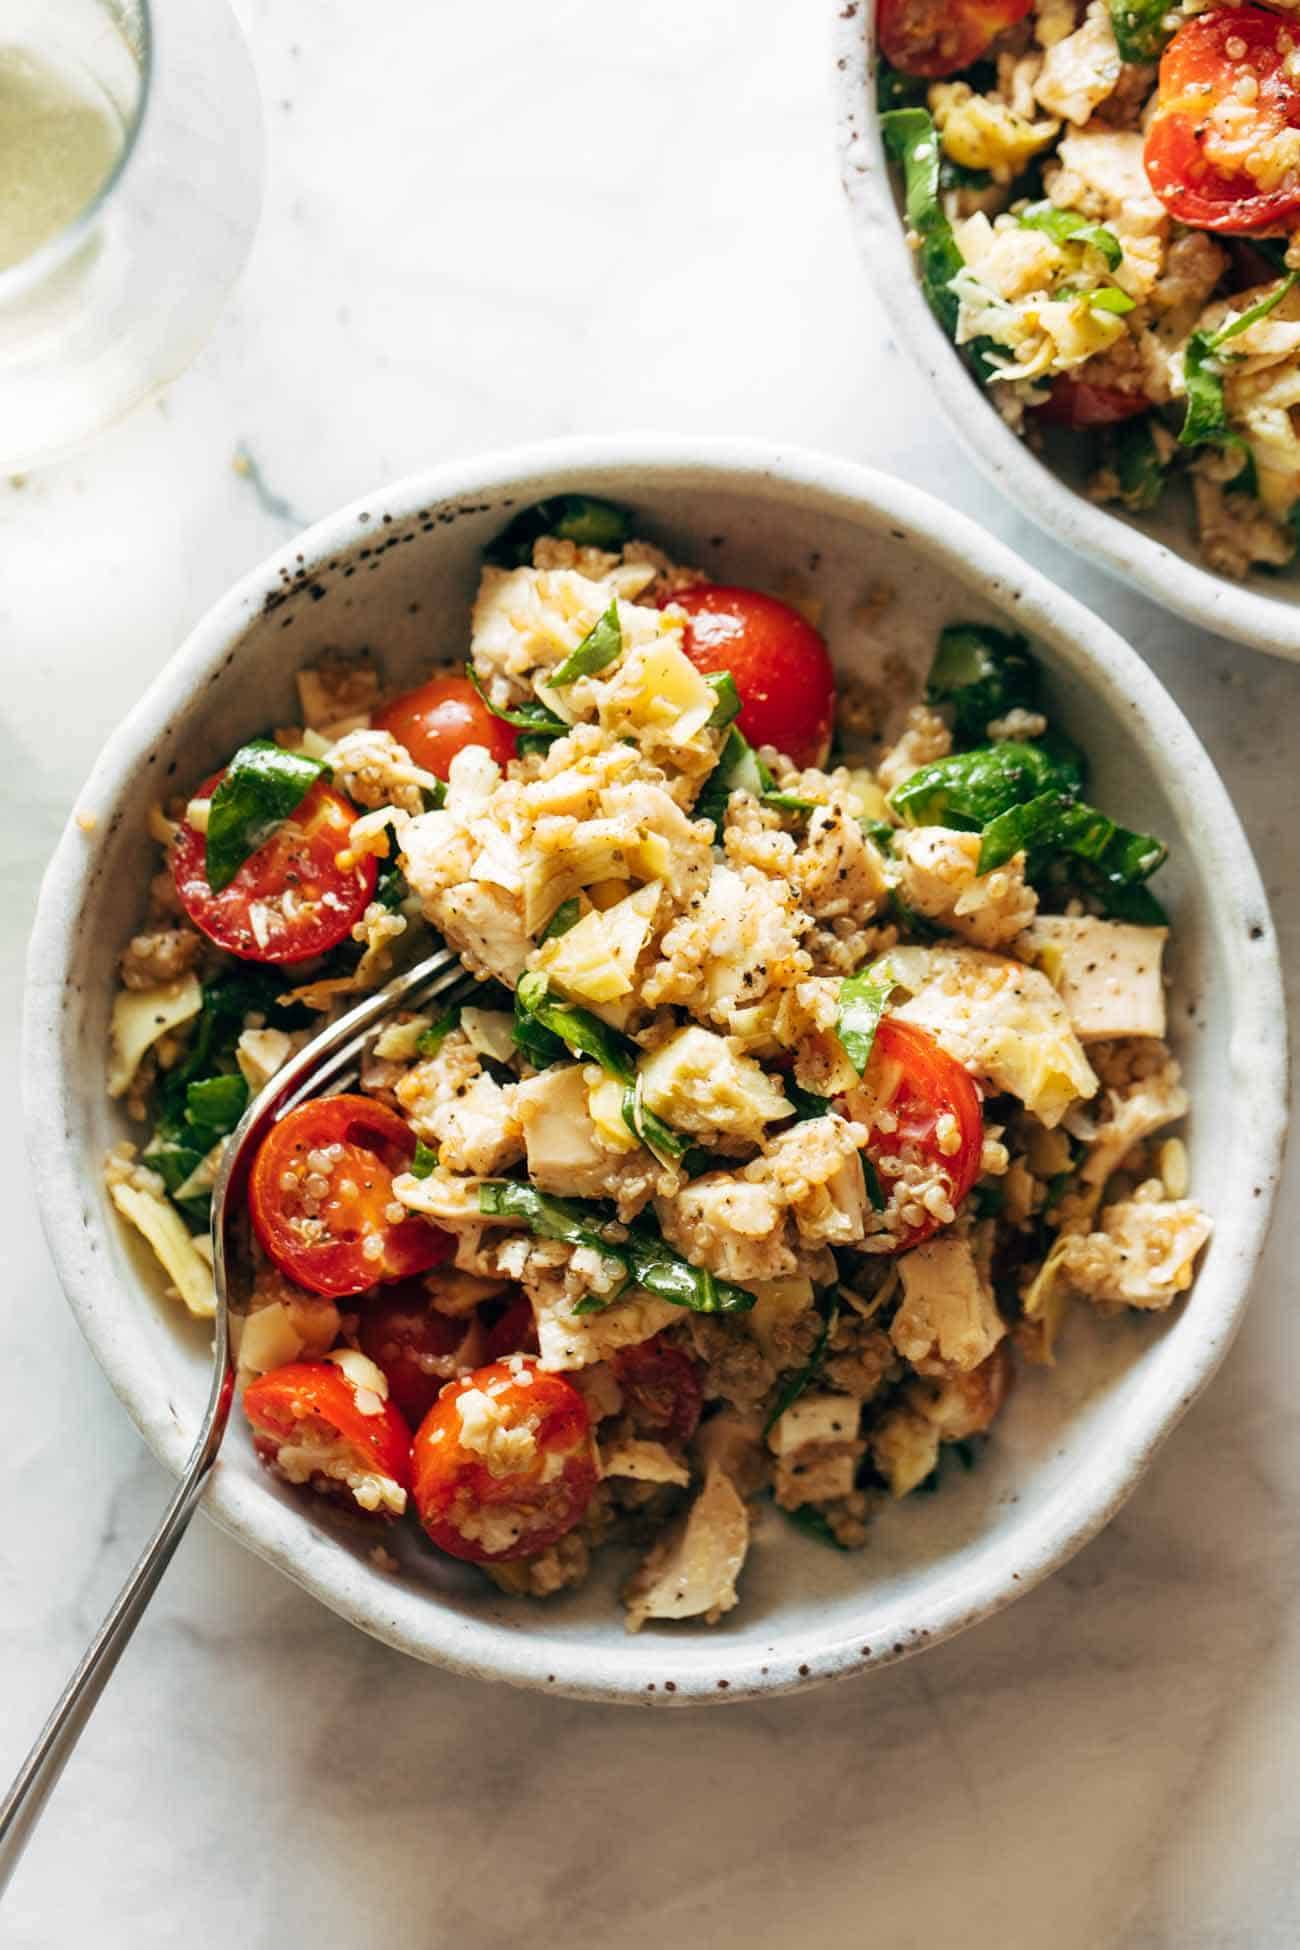 Chicken quinoa salad in a bowl with a fork